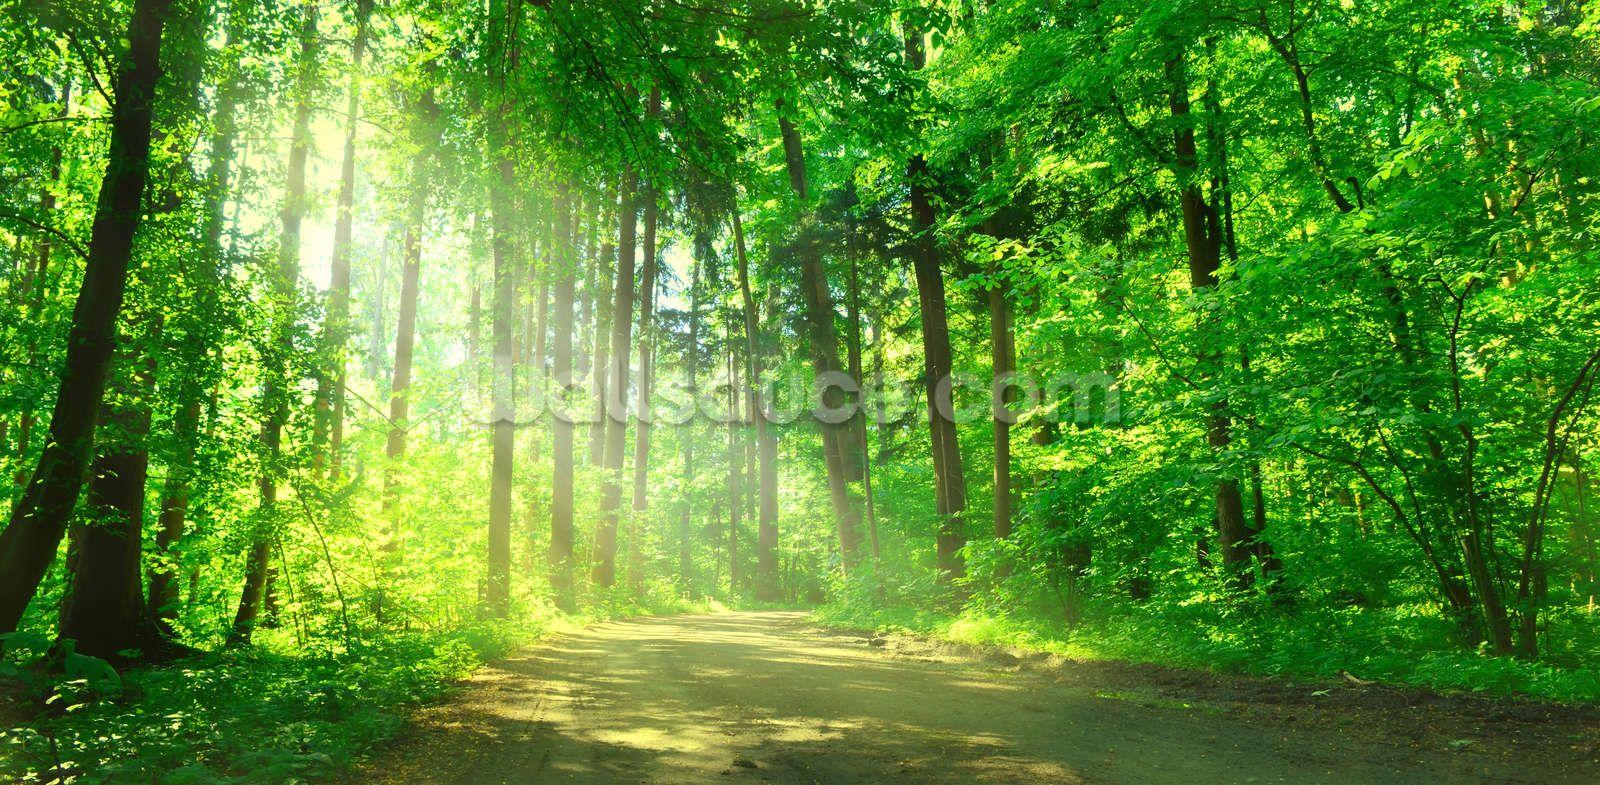 Forest Path in Sunshine Wallpaper Wall Mural